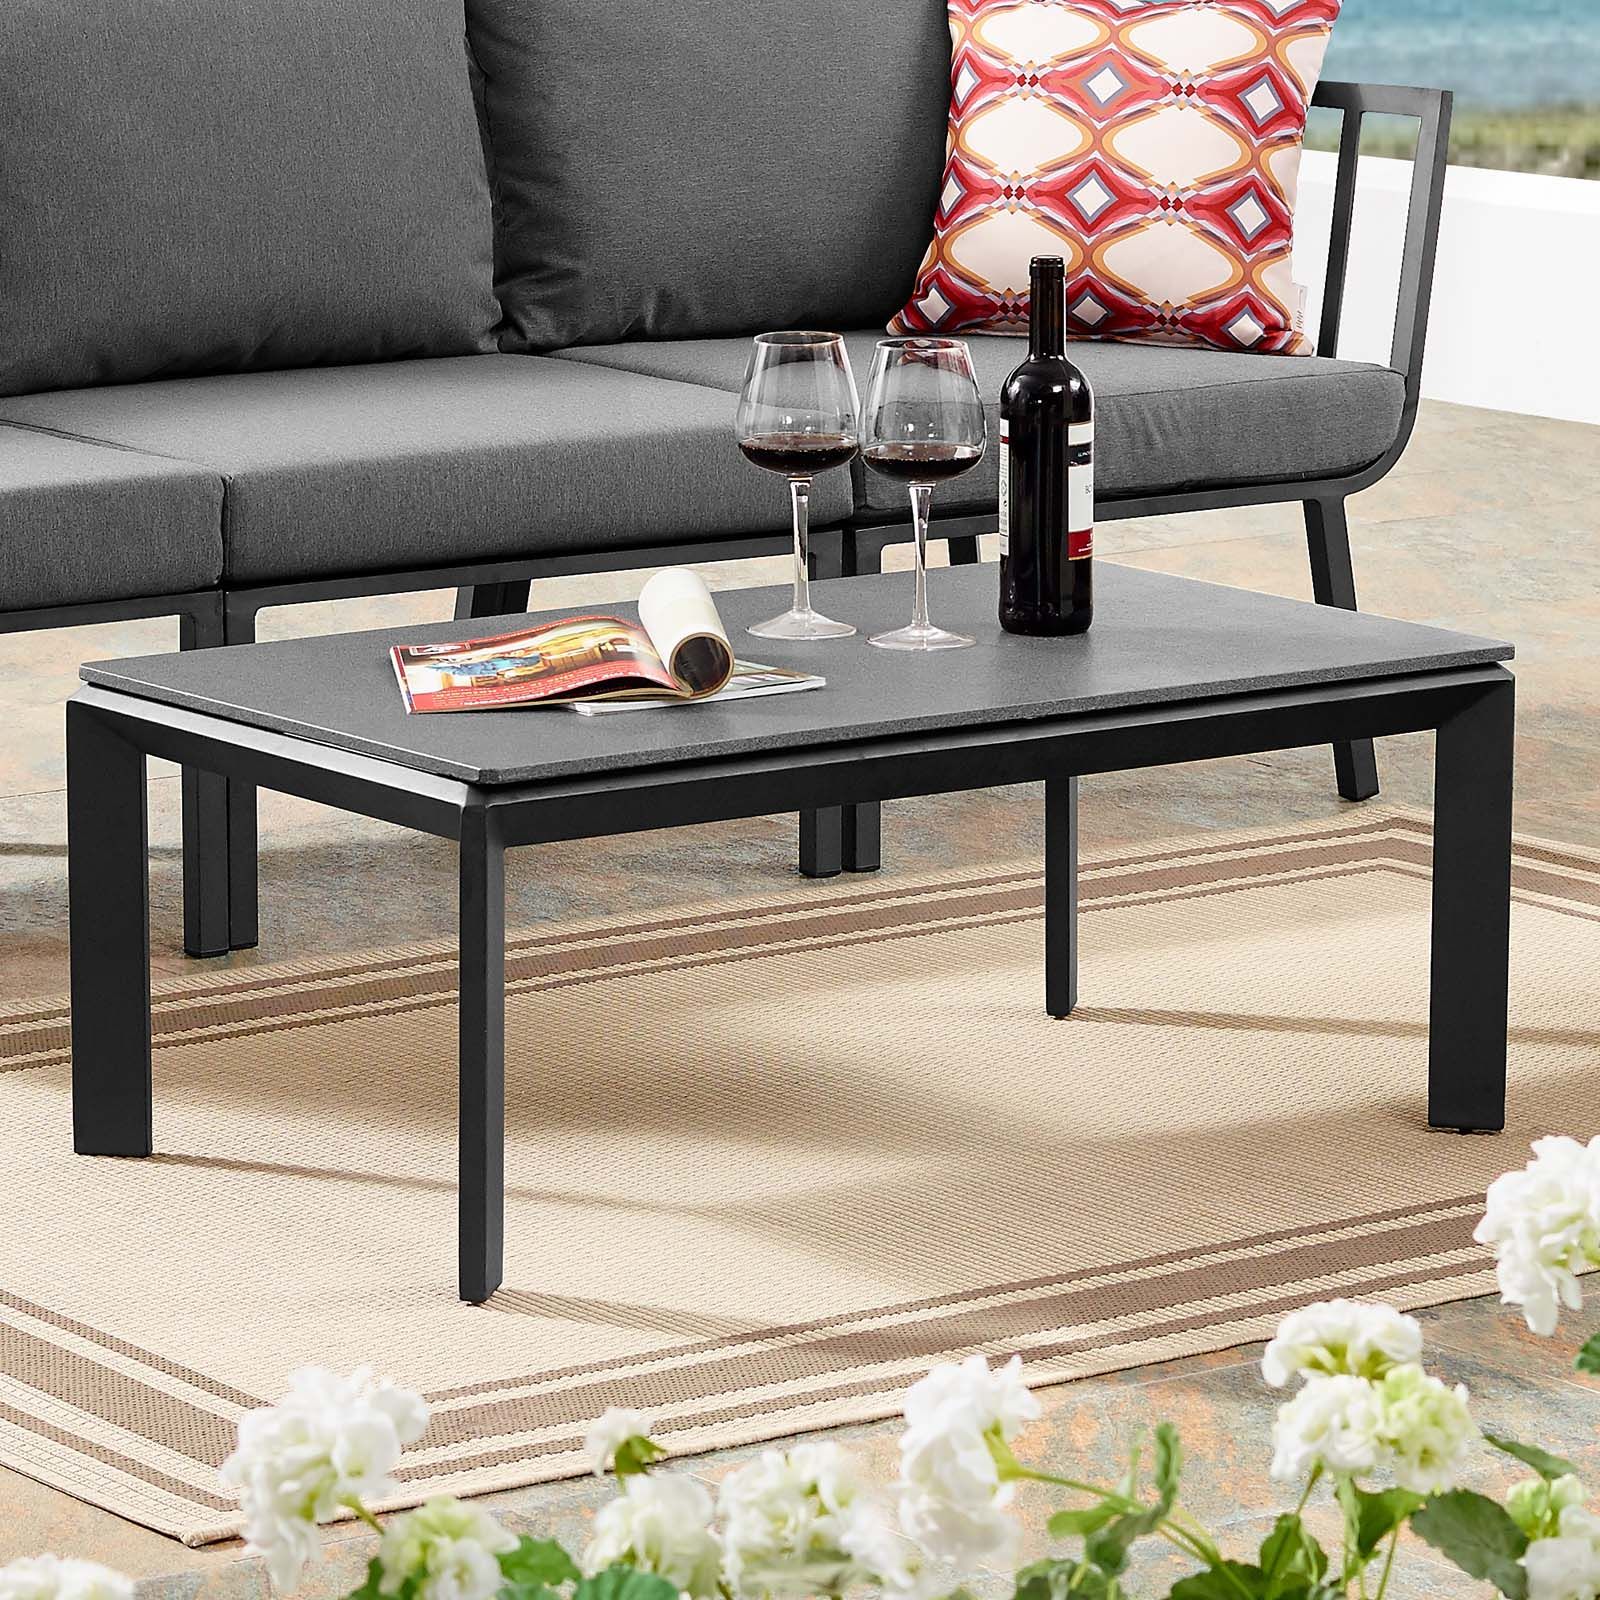 Riverside Aluminum Outdoor Patio Coffee Table Gray Throughout Modern Outdoor Patio Coffee Tables (View 13 of 15)